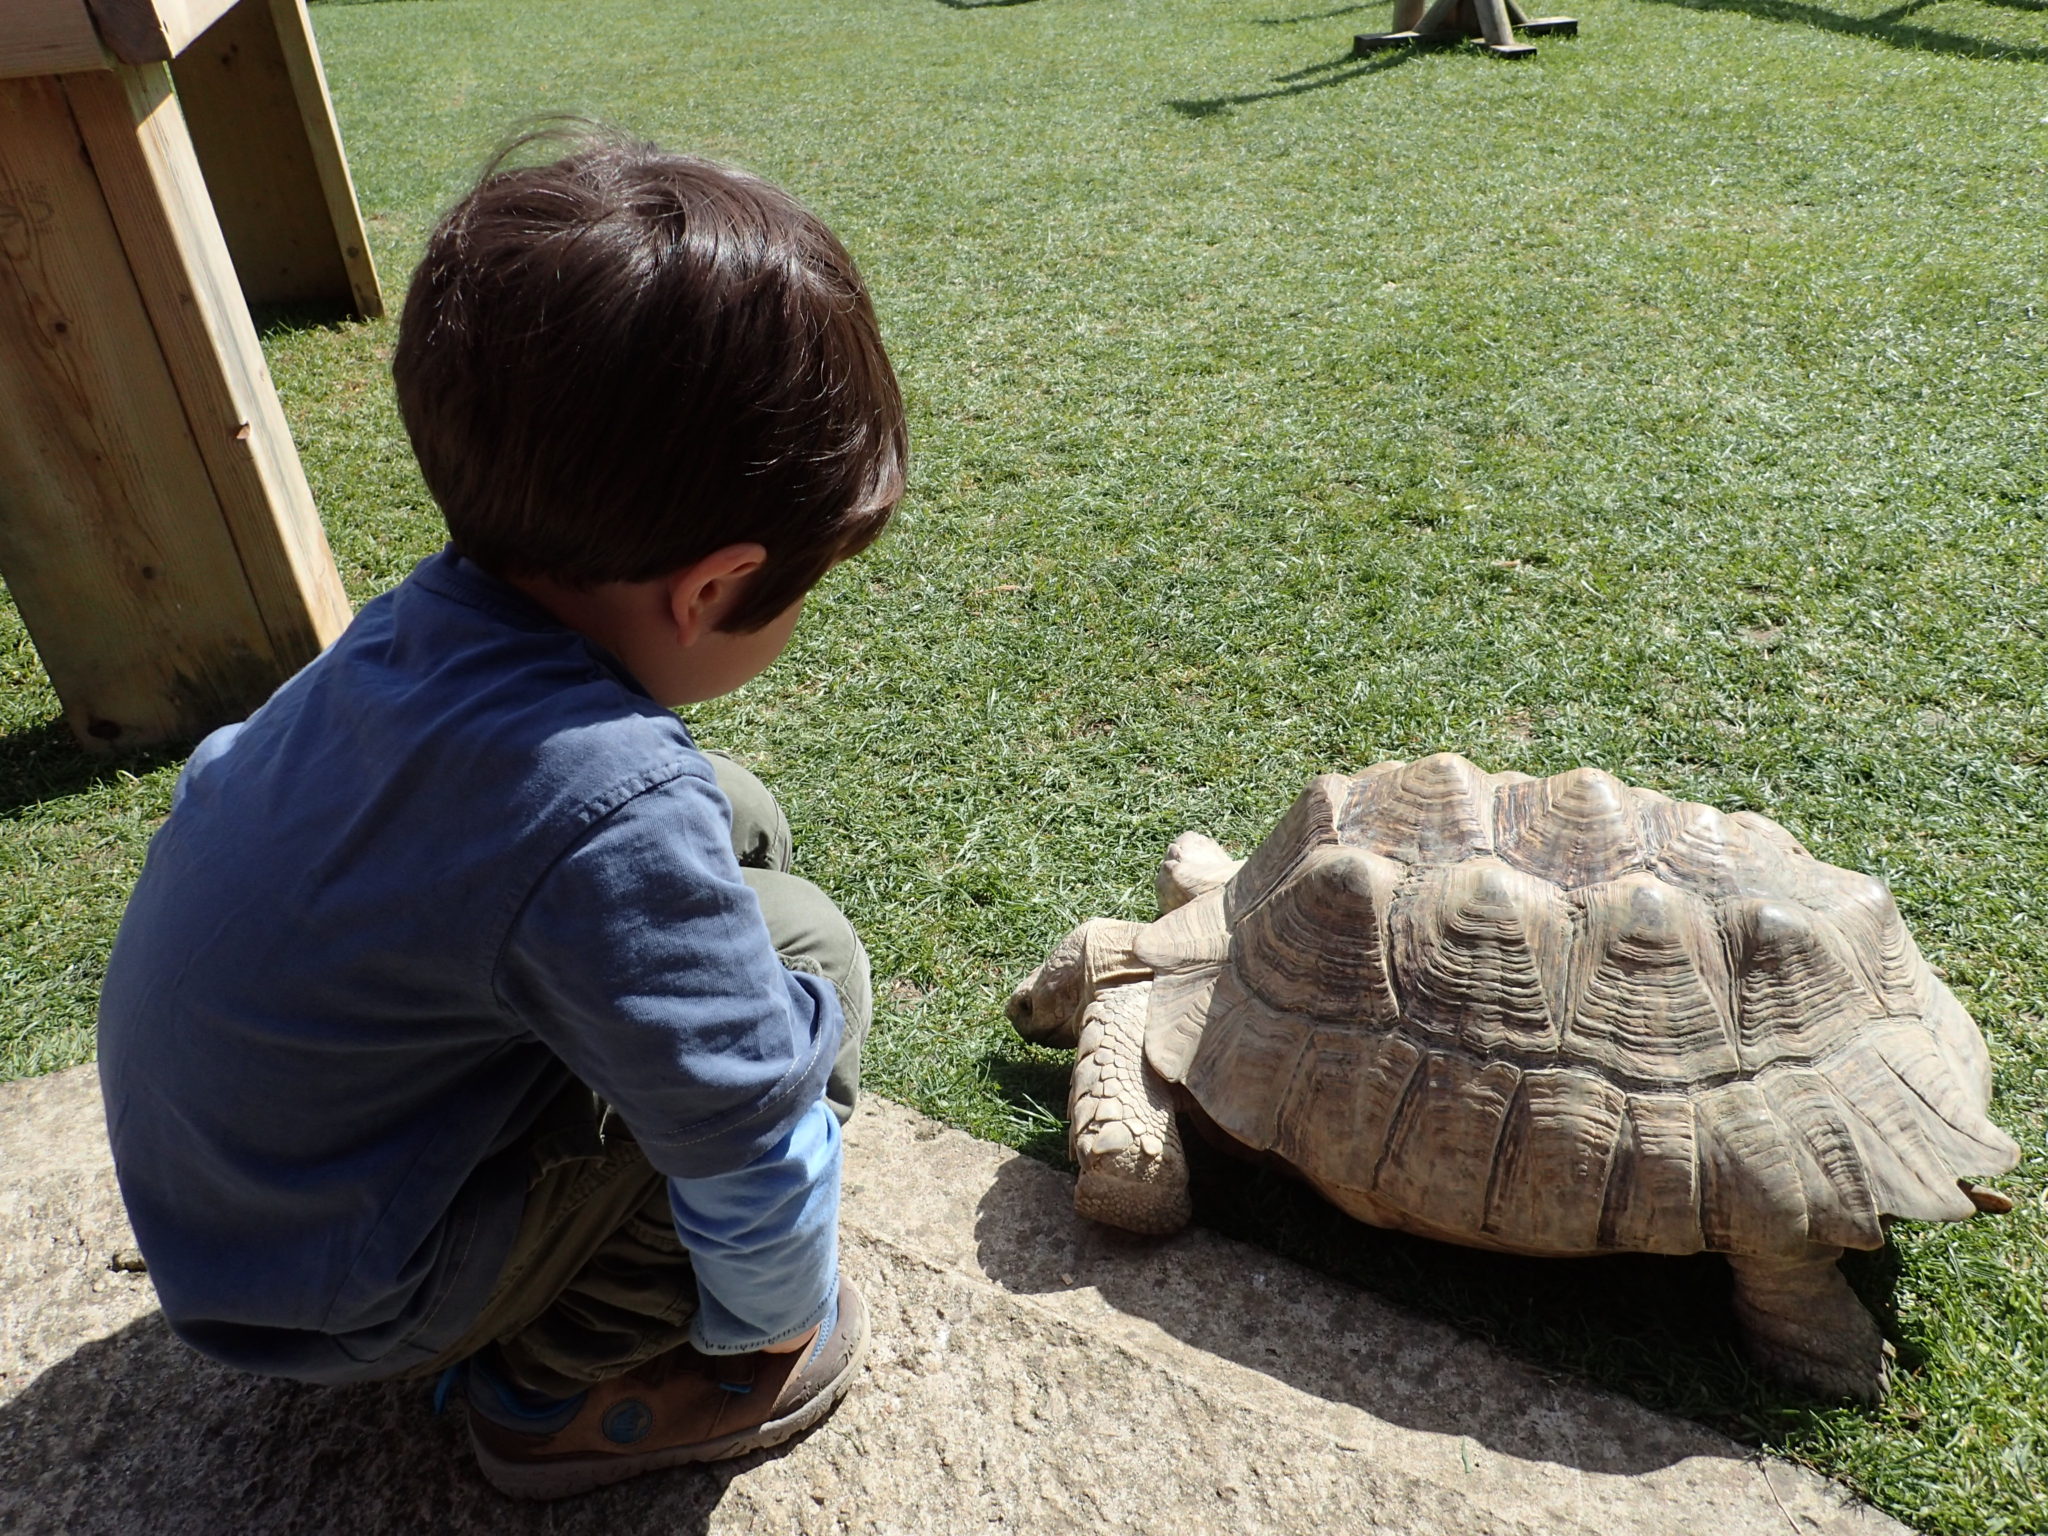 Giant Tortoise at Birdland, Cotswolds Day Out with the Kids